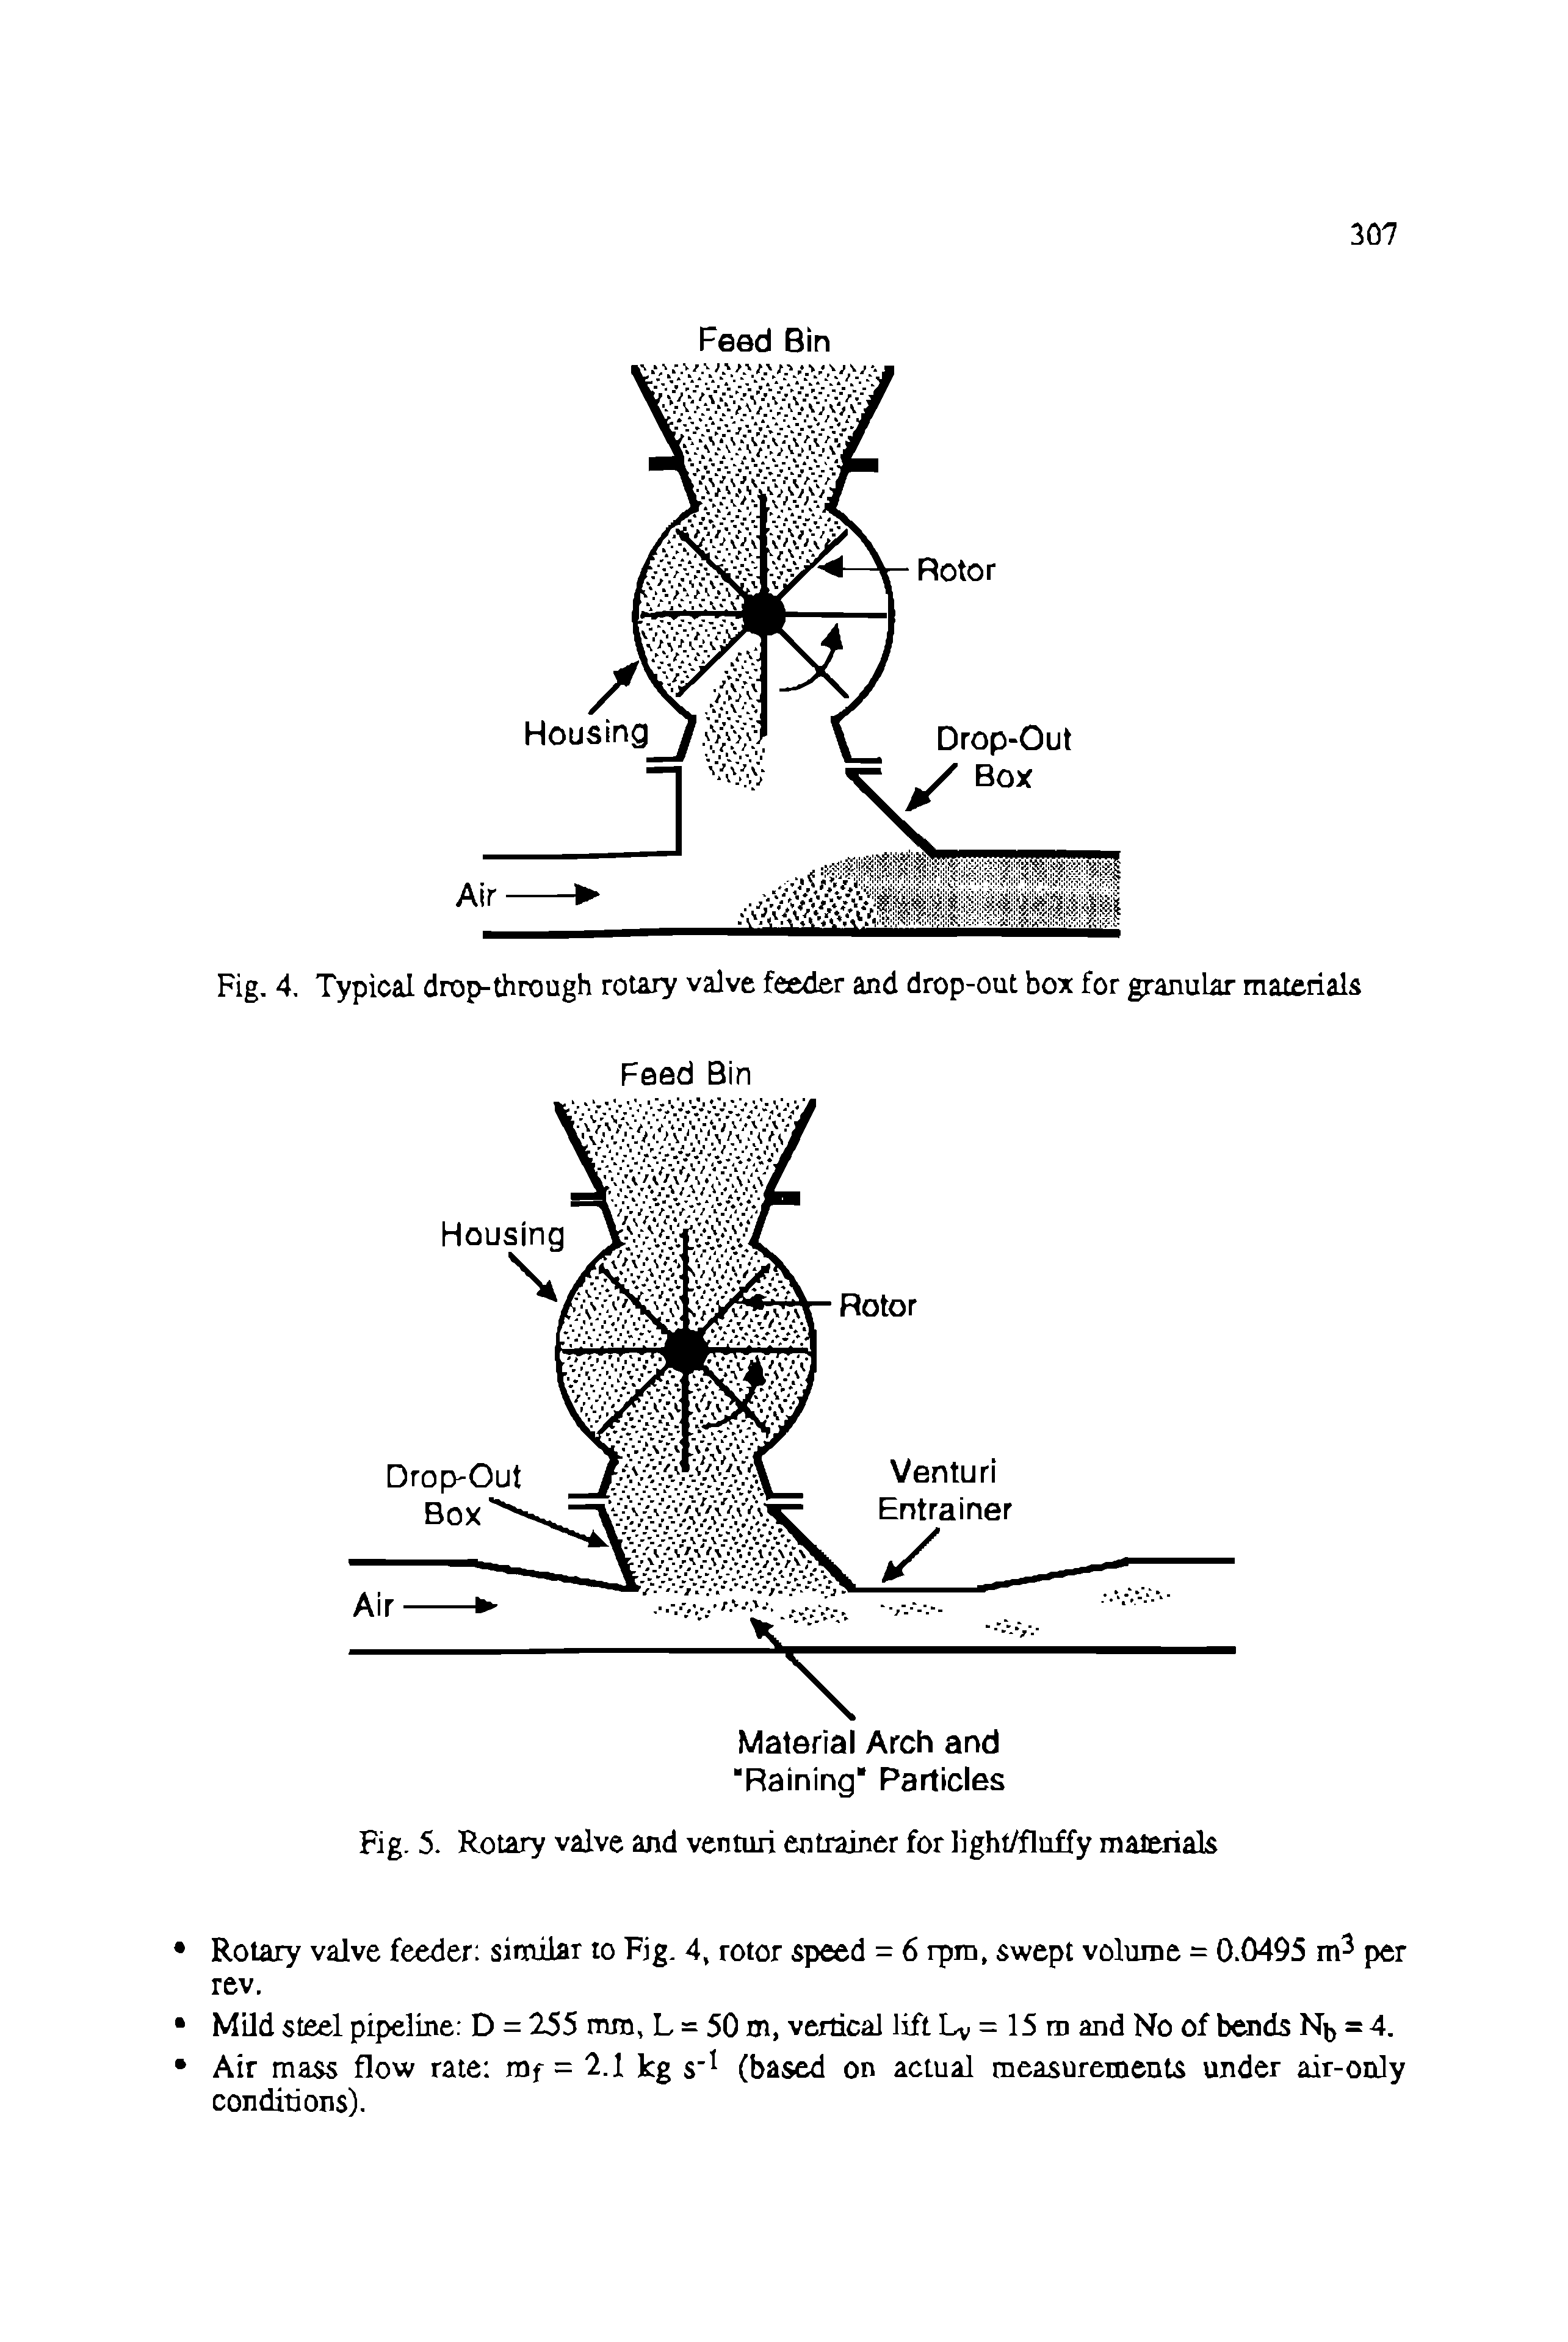 Fig. 4. Typical drop-through rotary valve feeder and drop-out box for granular materials...